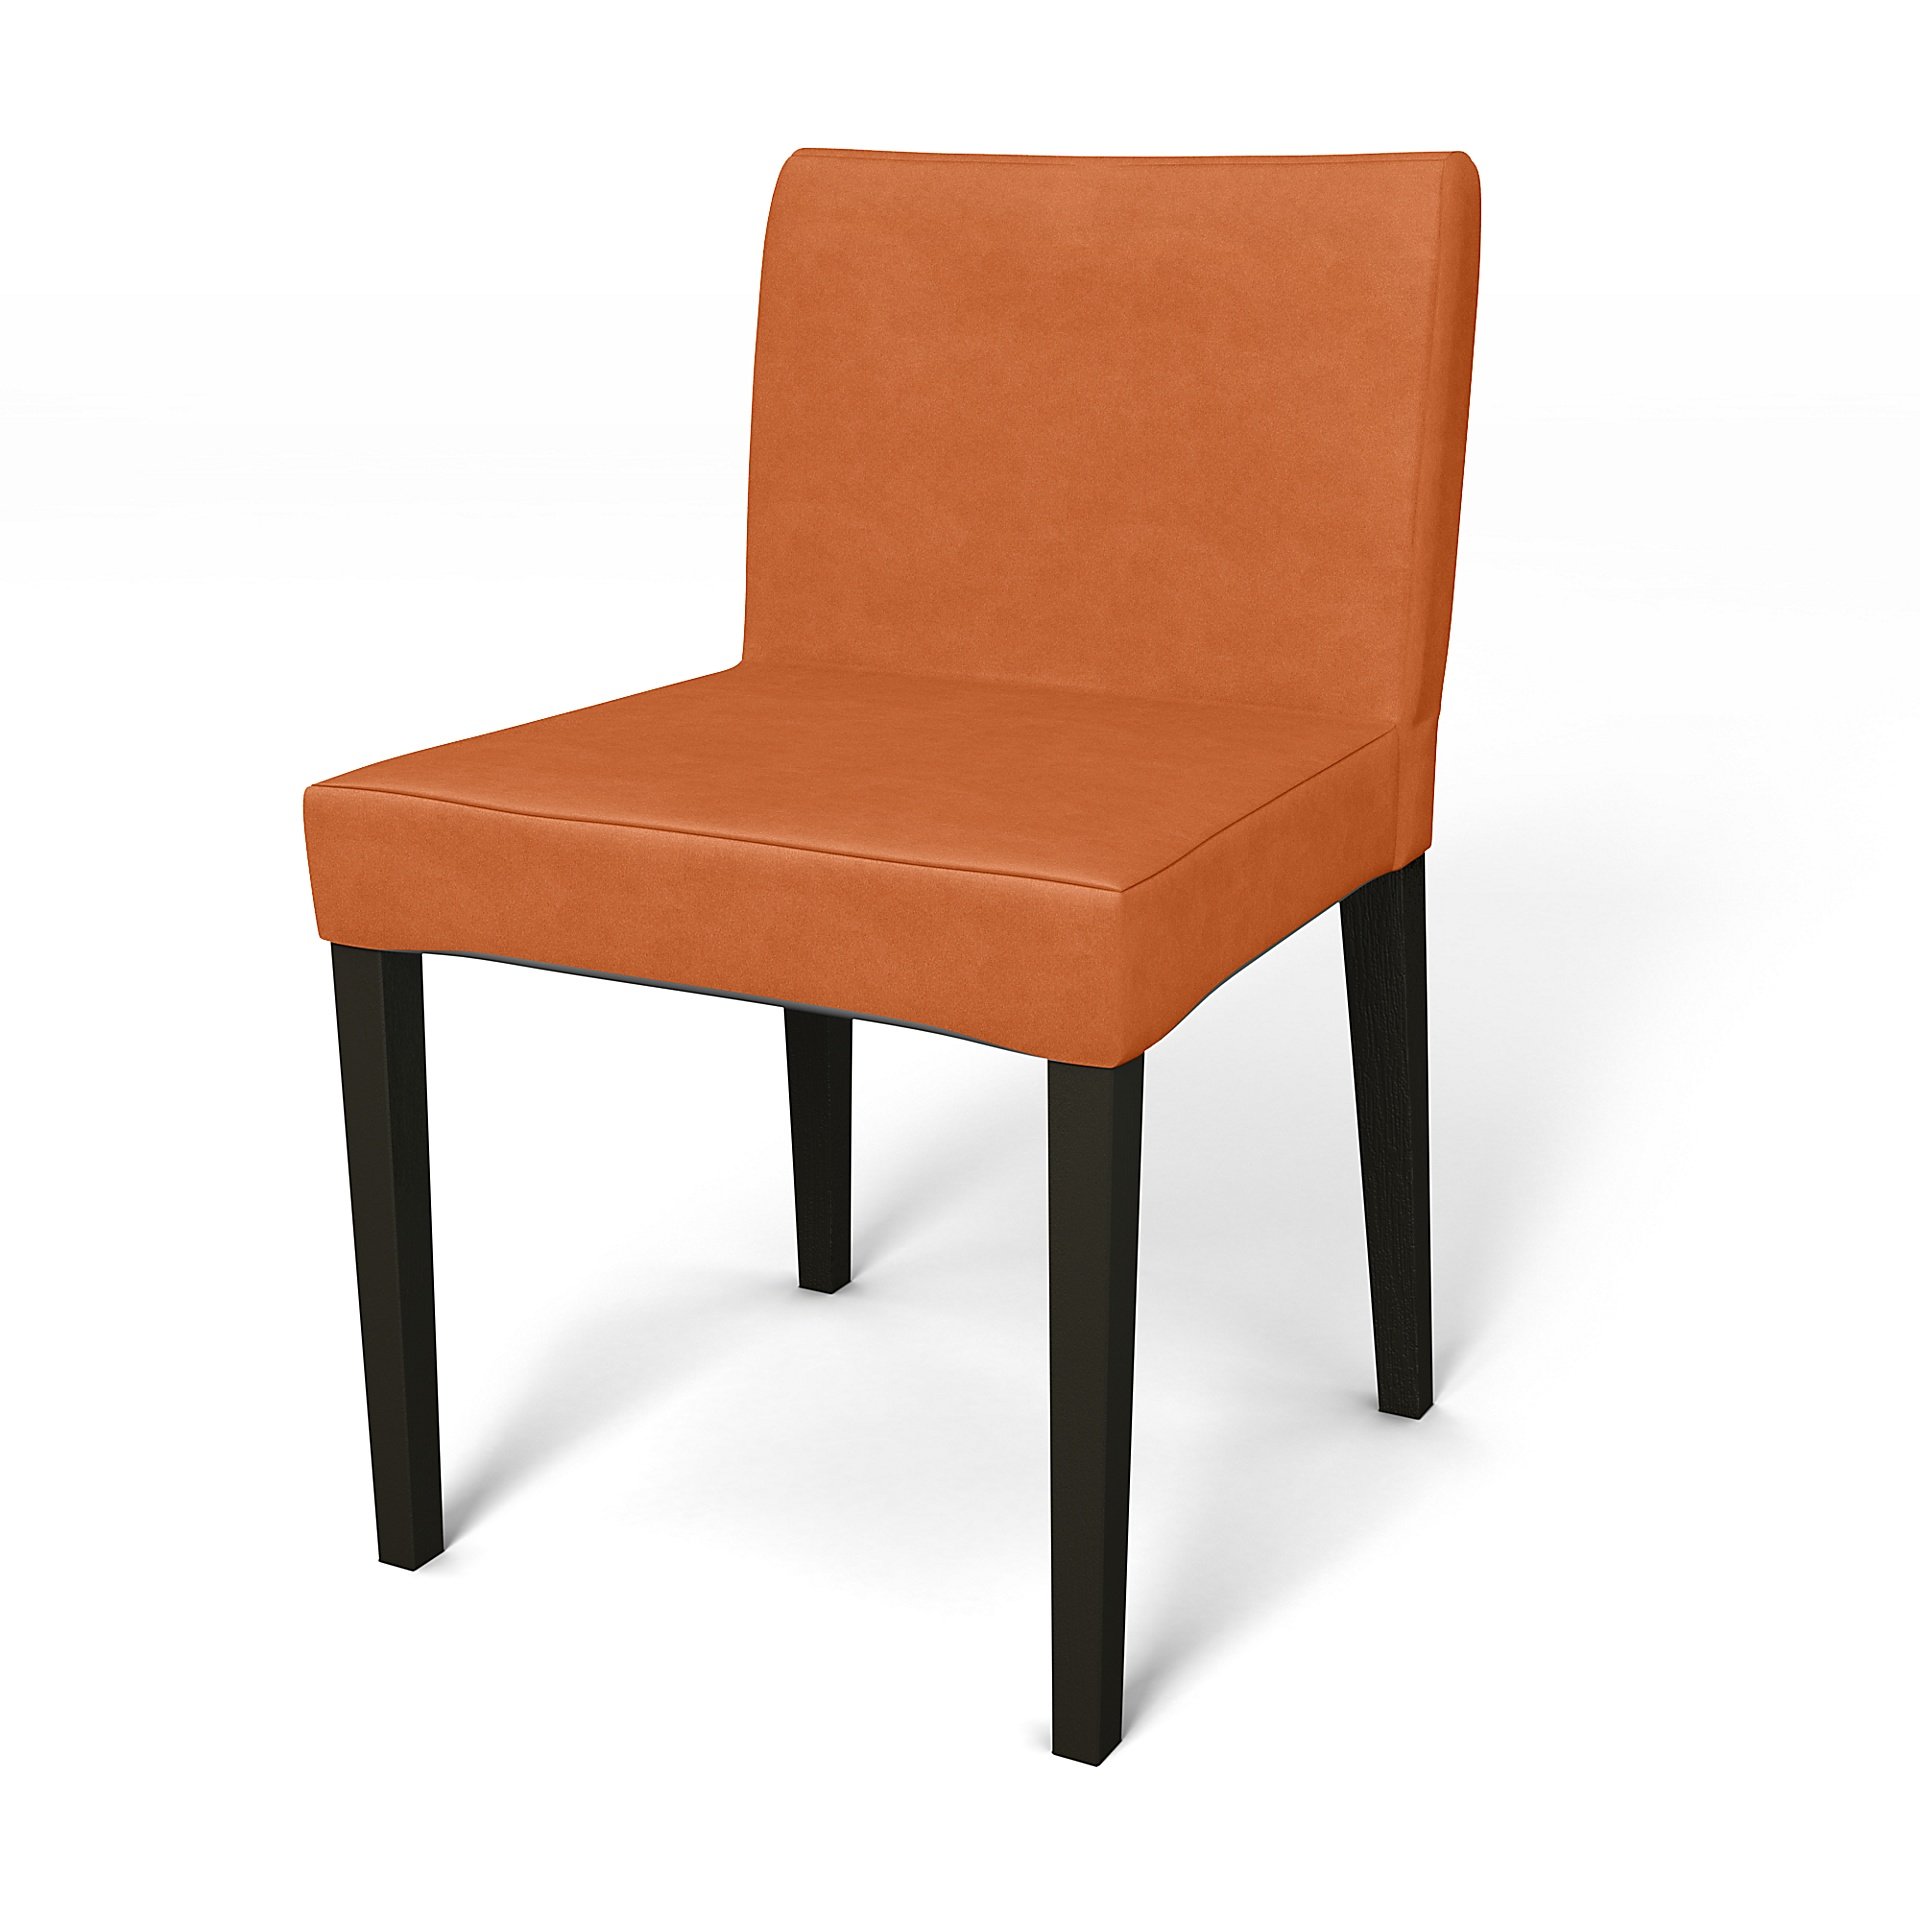 IKEA - Nils Dining Chair Cover, Rust, Outdoor - Bemz